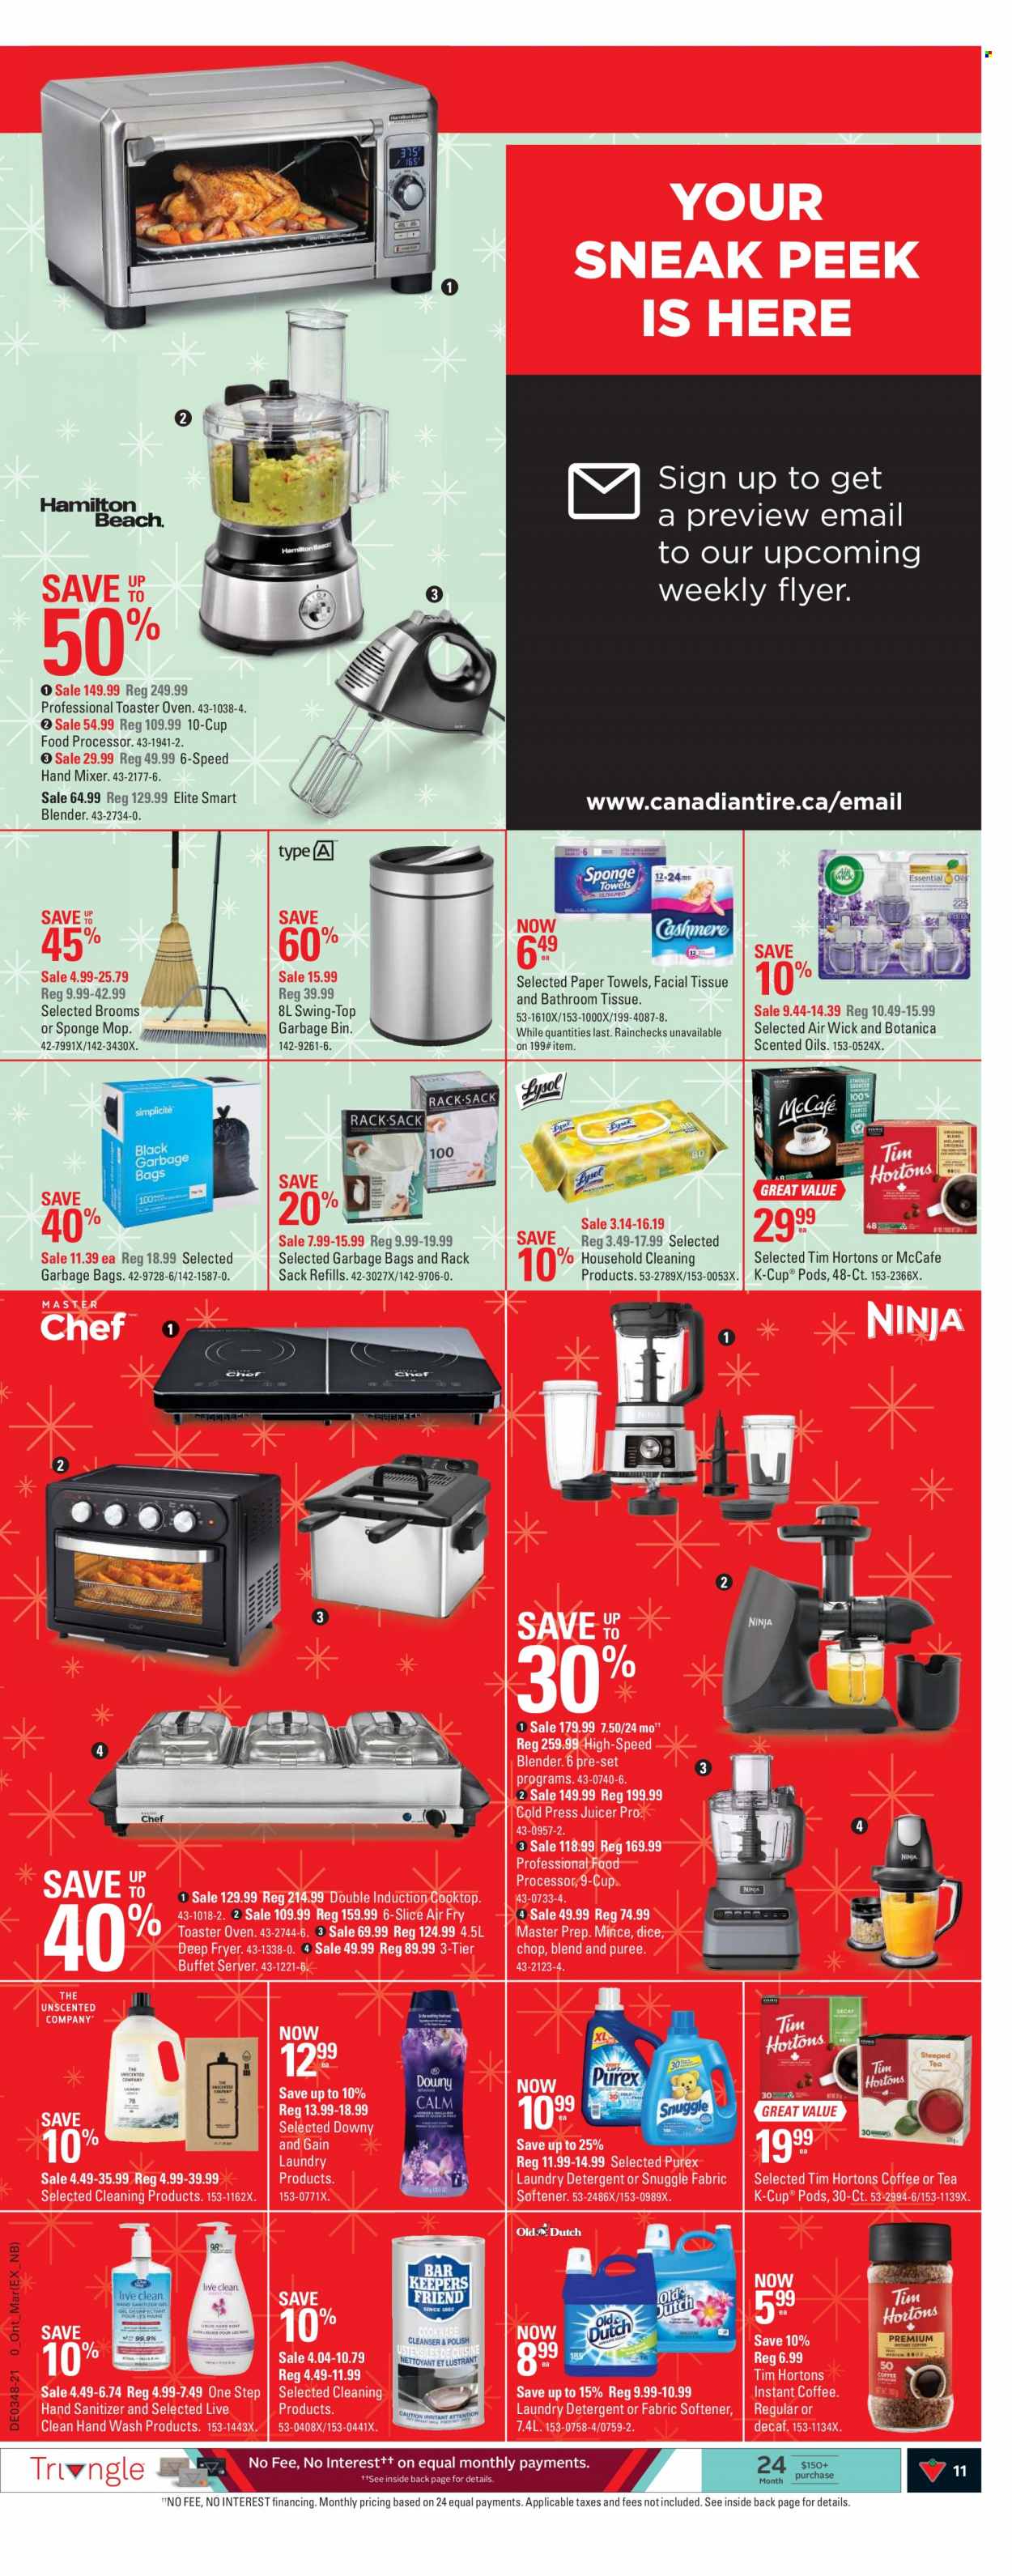 thumbnail - Canadian Tire Flyer - November 25, 2021 - December 01, 2021 - Sales products - bath tissue, kitchen towels, paper towels, Snuggle, fabric softener, laundry detergent, Purex, bag, mop, Air Wick, cooktop, induction cooktop, deep fryer, mixer, hand mixer, food processor, juicer, hand sanitizer, blender, detergent. Page 11.